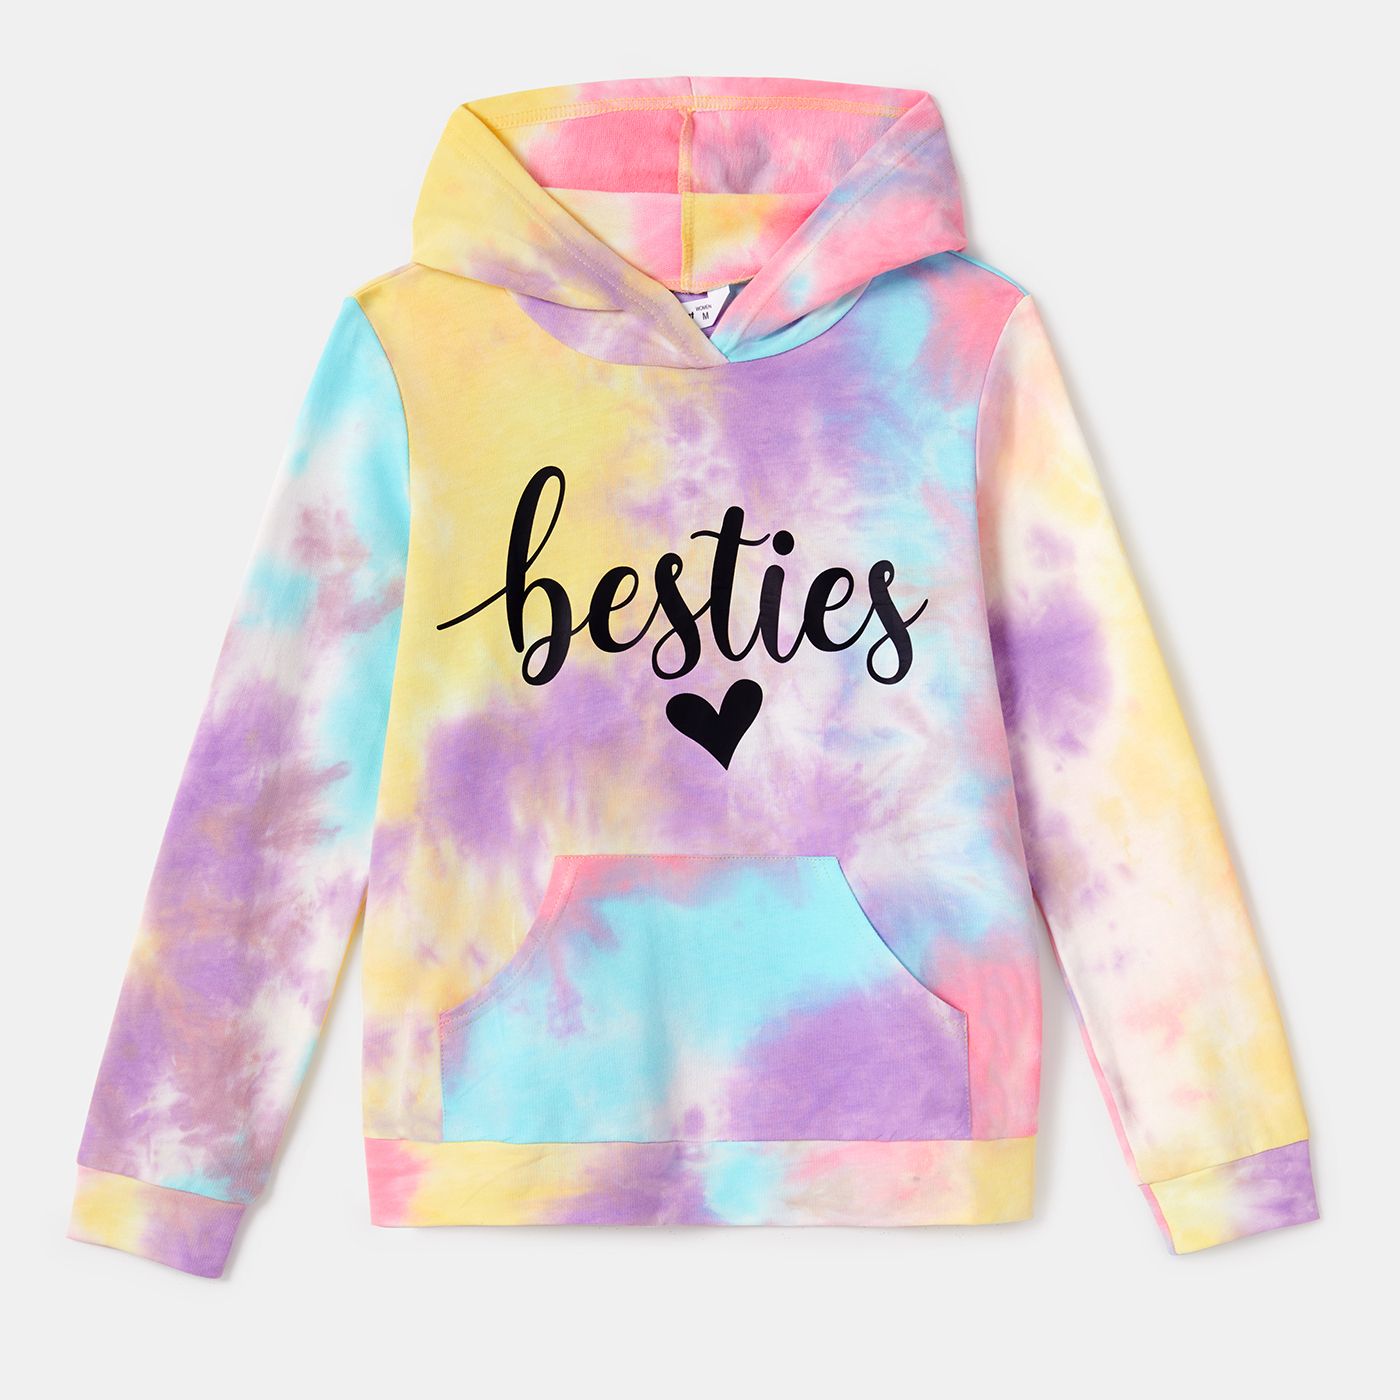 100% Cotton Letter Print Colorful Tie Dye Long-sleeve Hoodies For Mom And Me